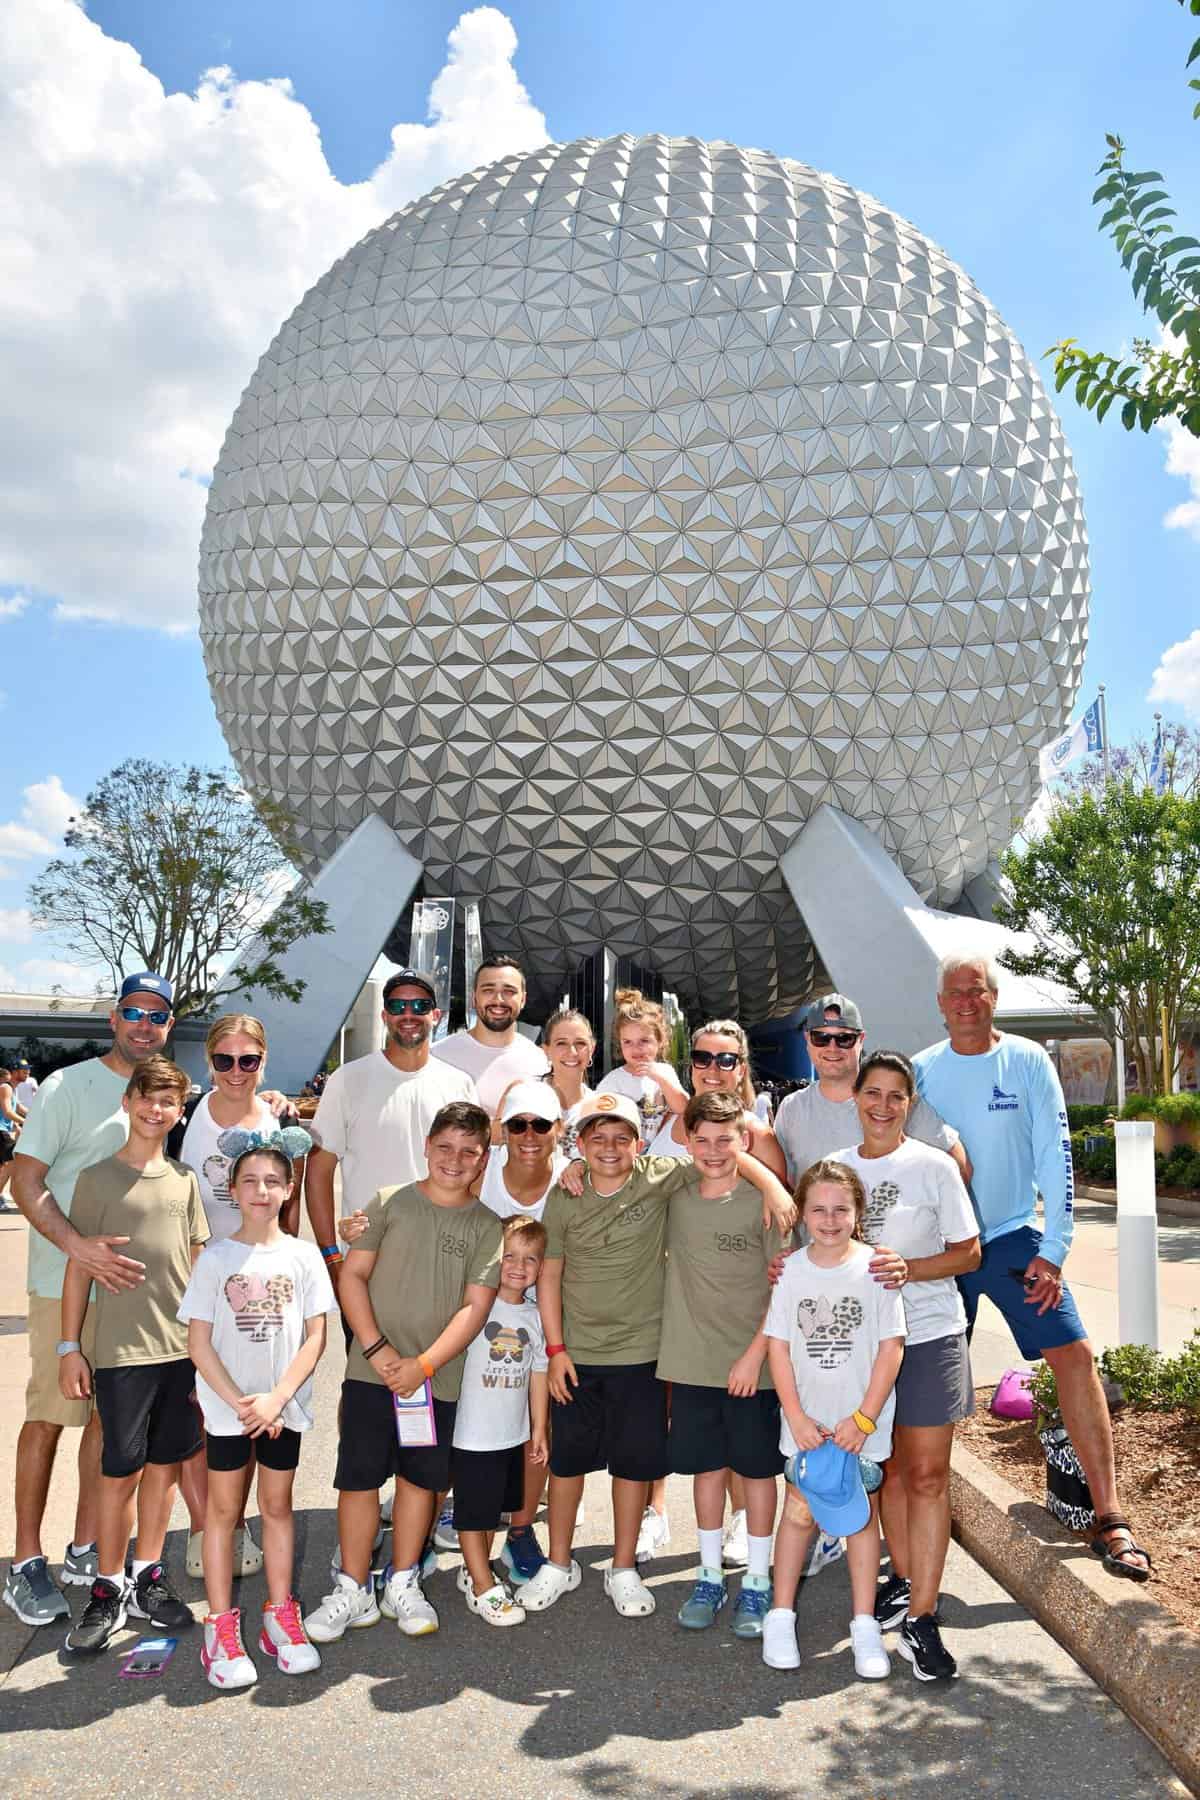 A family posing in front of the Epcot golf ball.